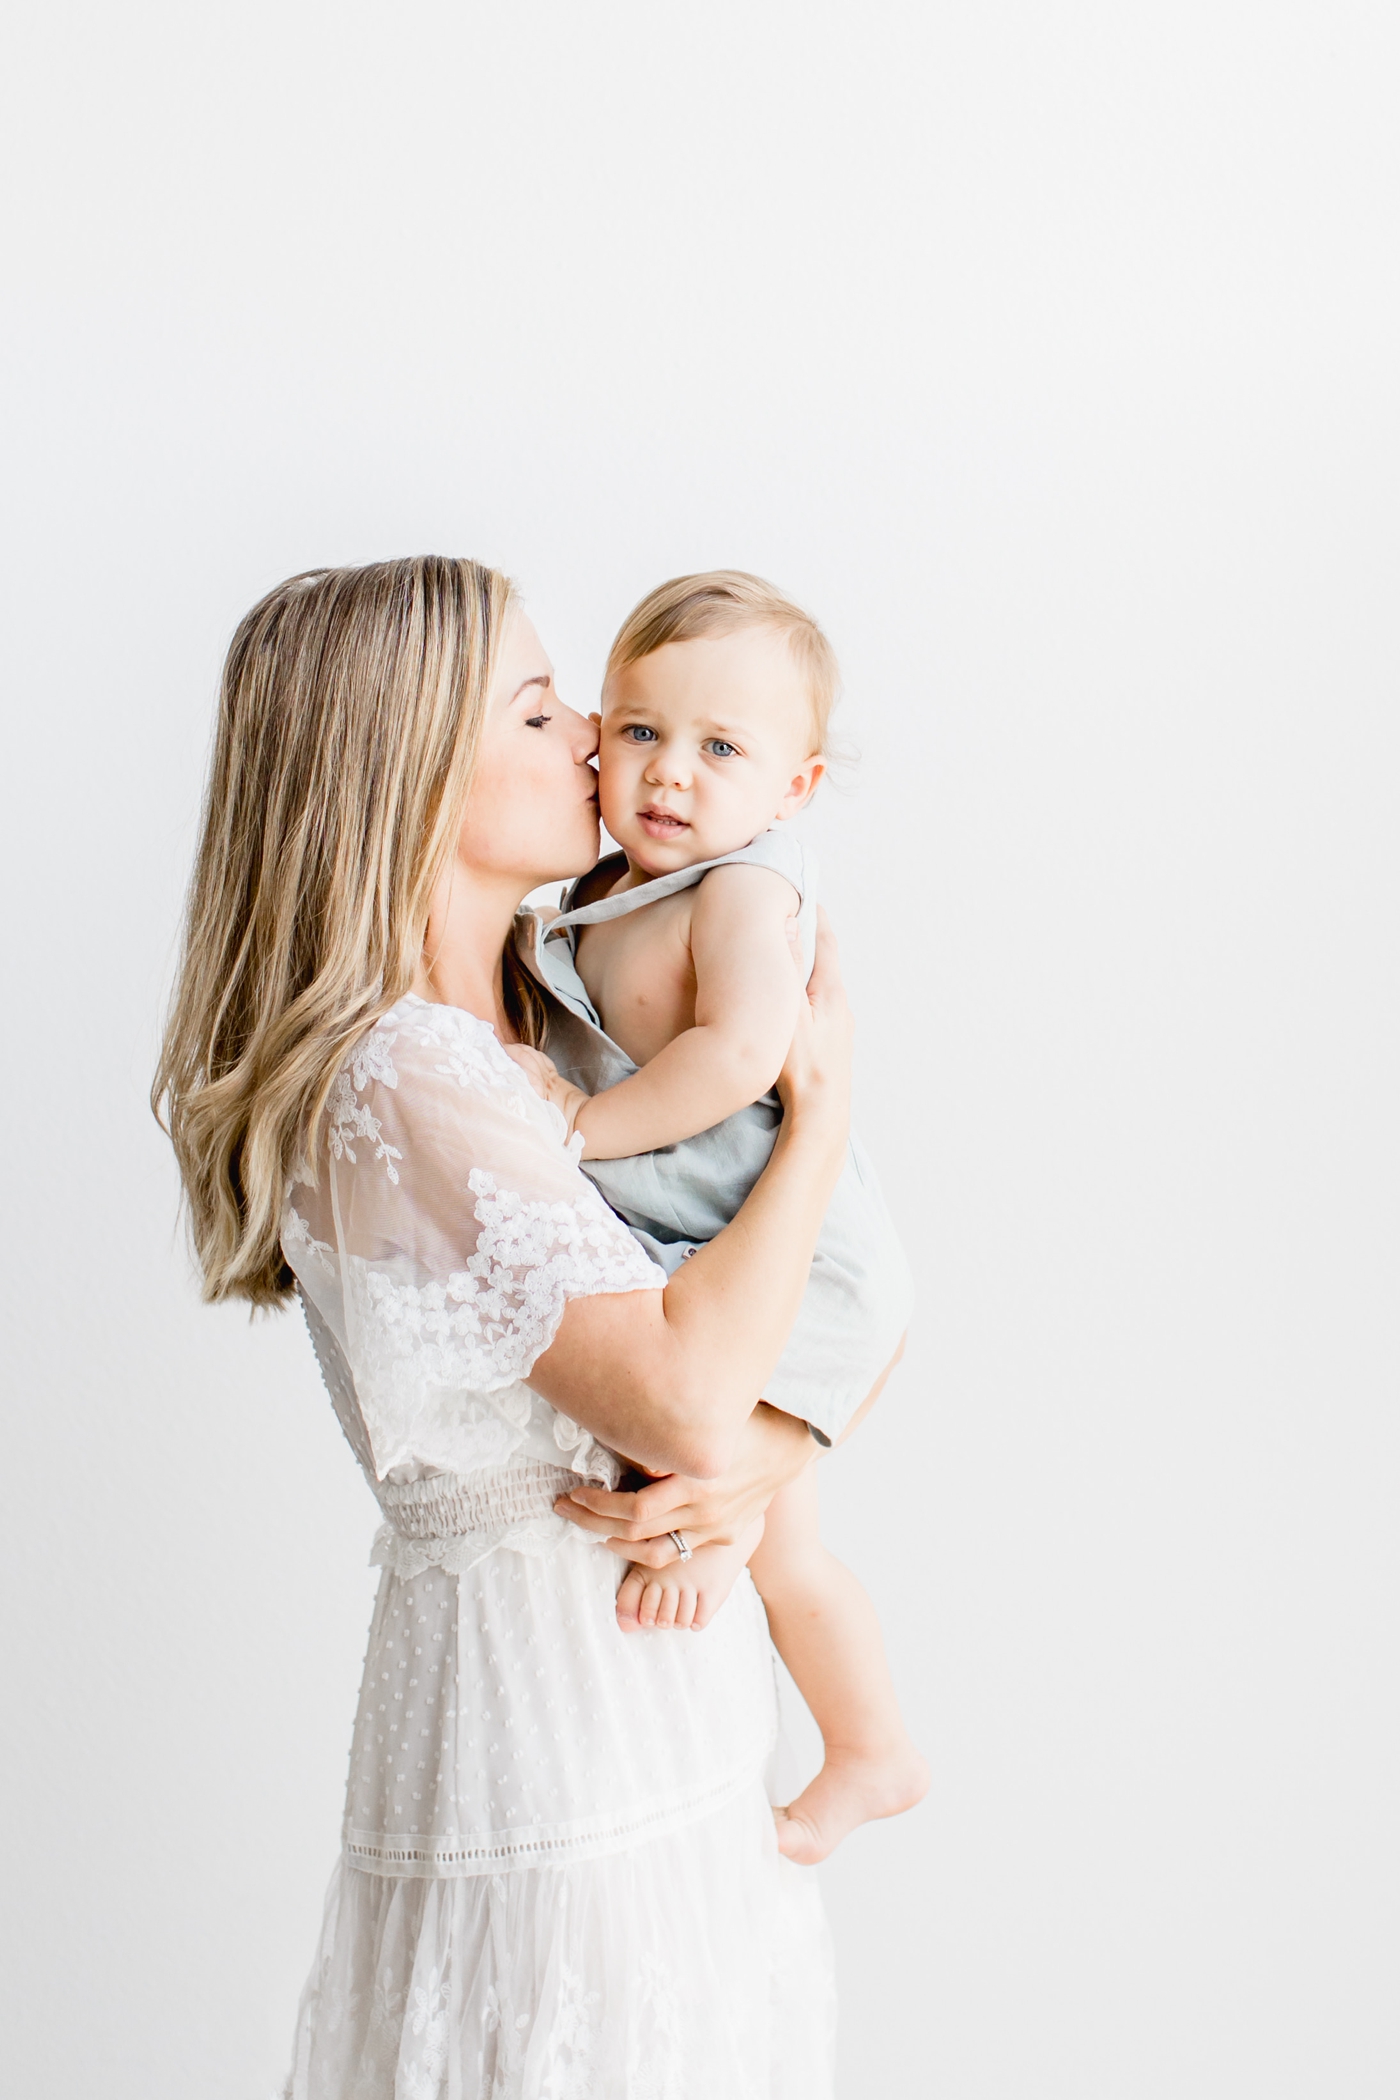 Mom kissing toddler in studio motherhood session. Photo by Sana Ahmed Photography.